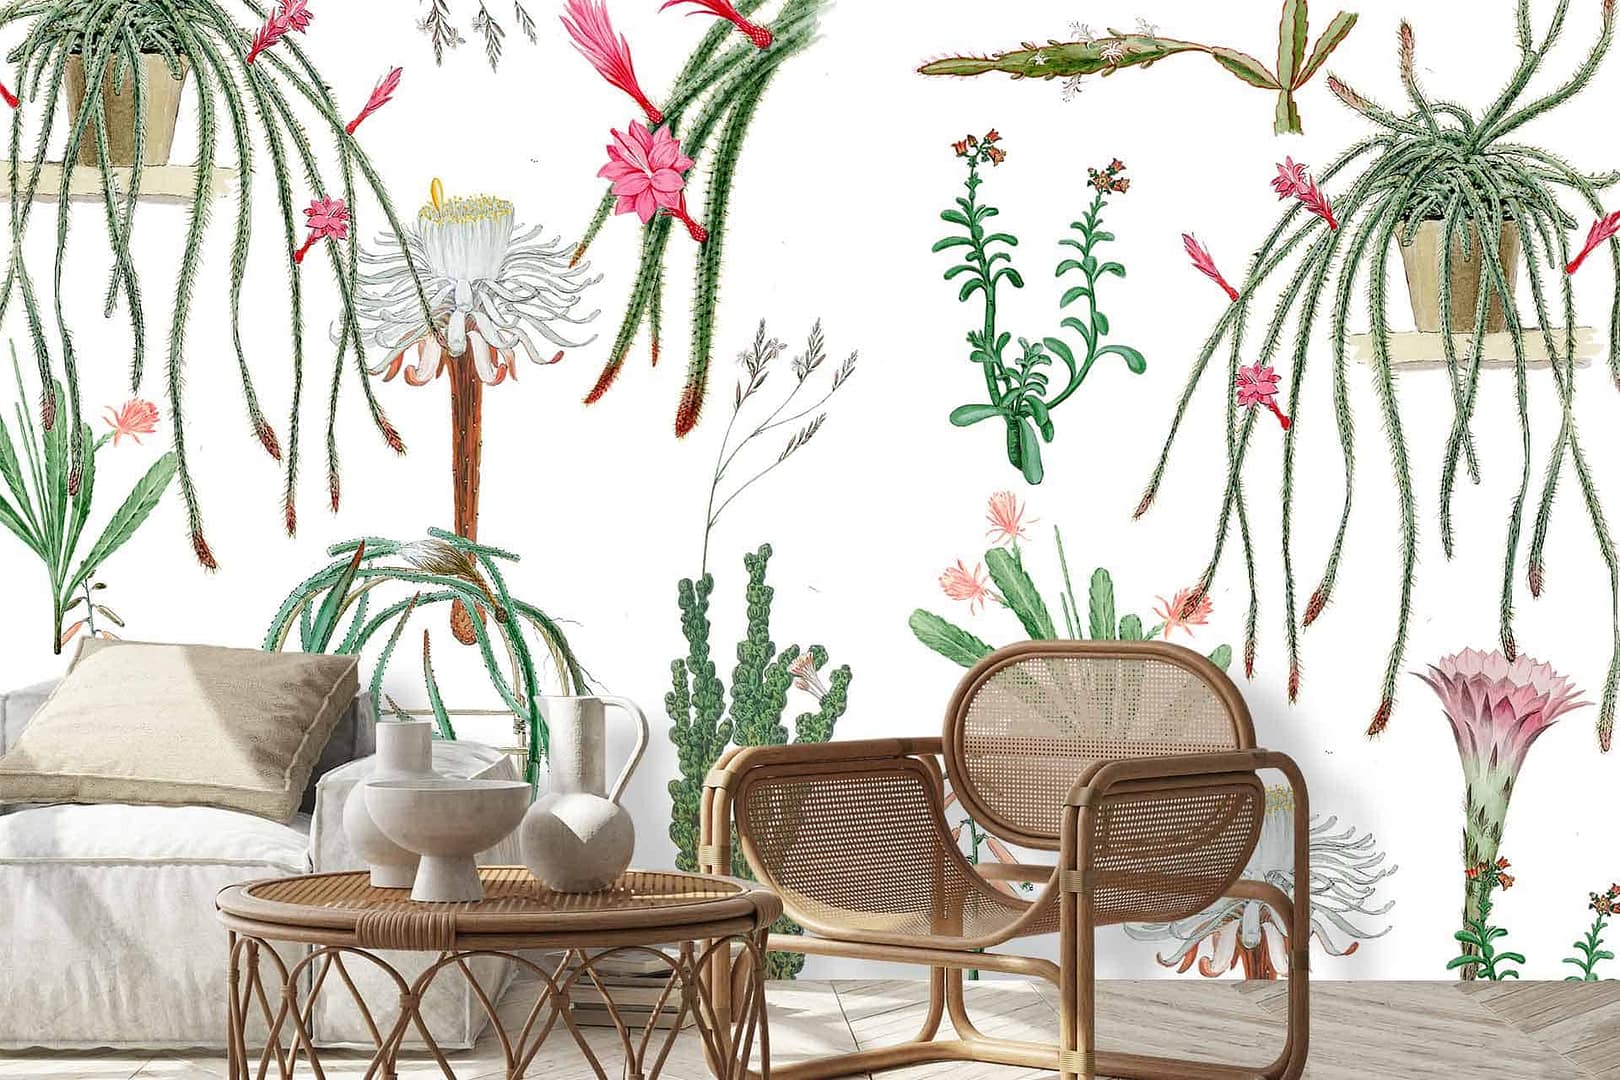 Green Fingers - a wallpaper of green botanical plants with pink flowers by Cara Saven Wall Design